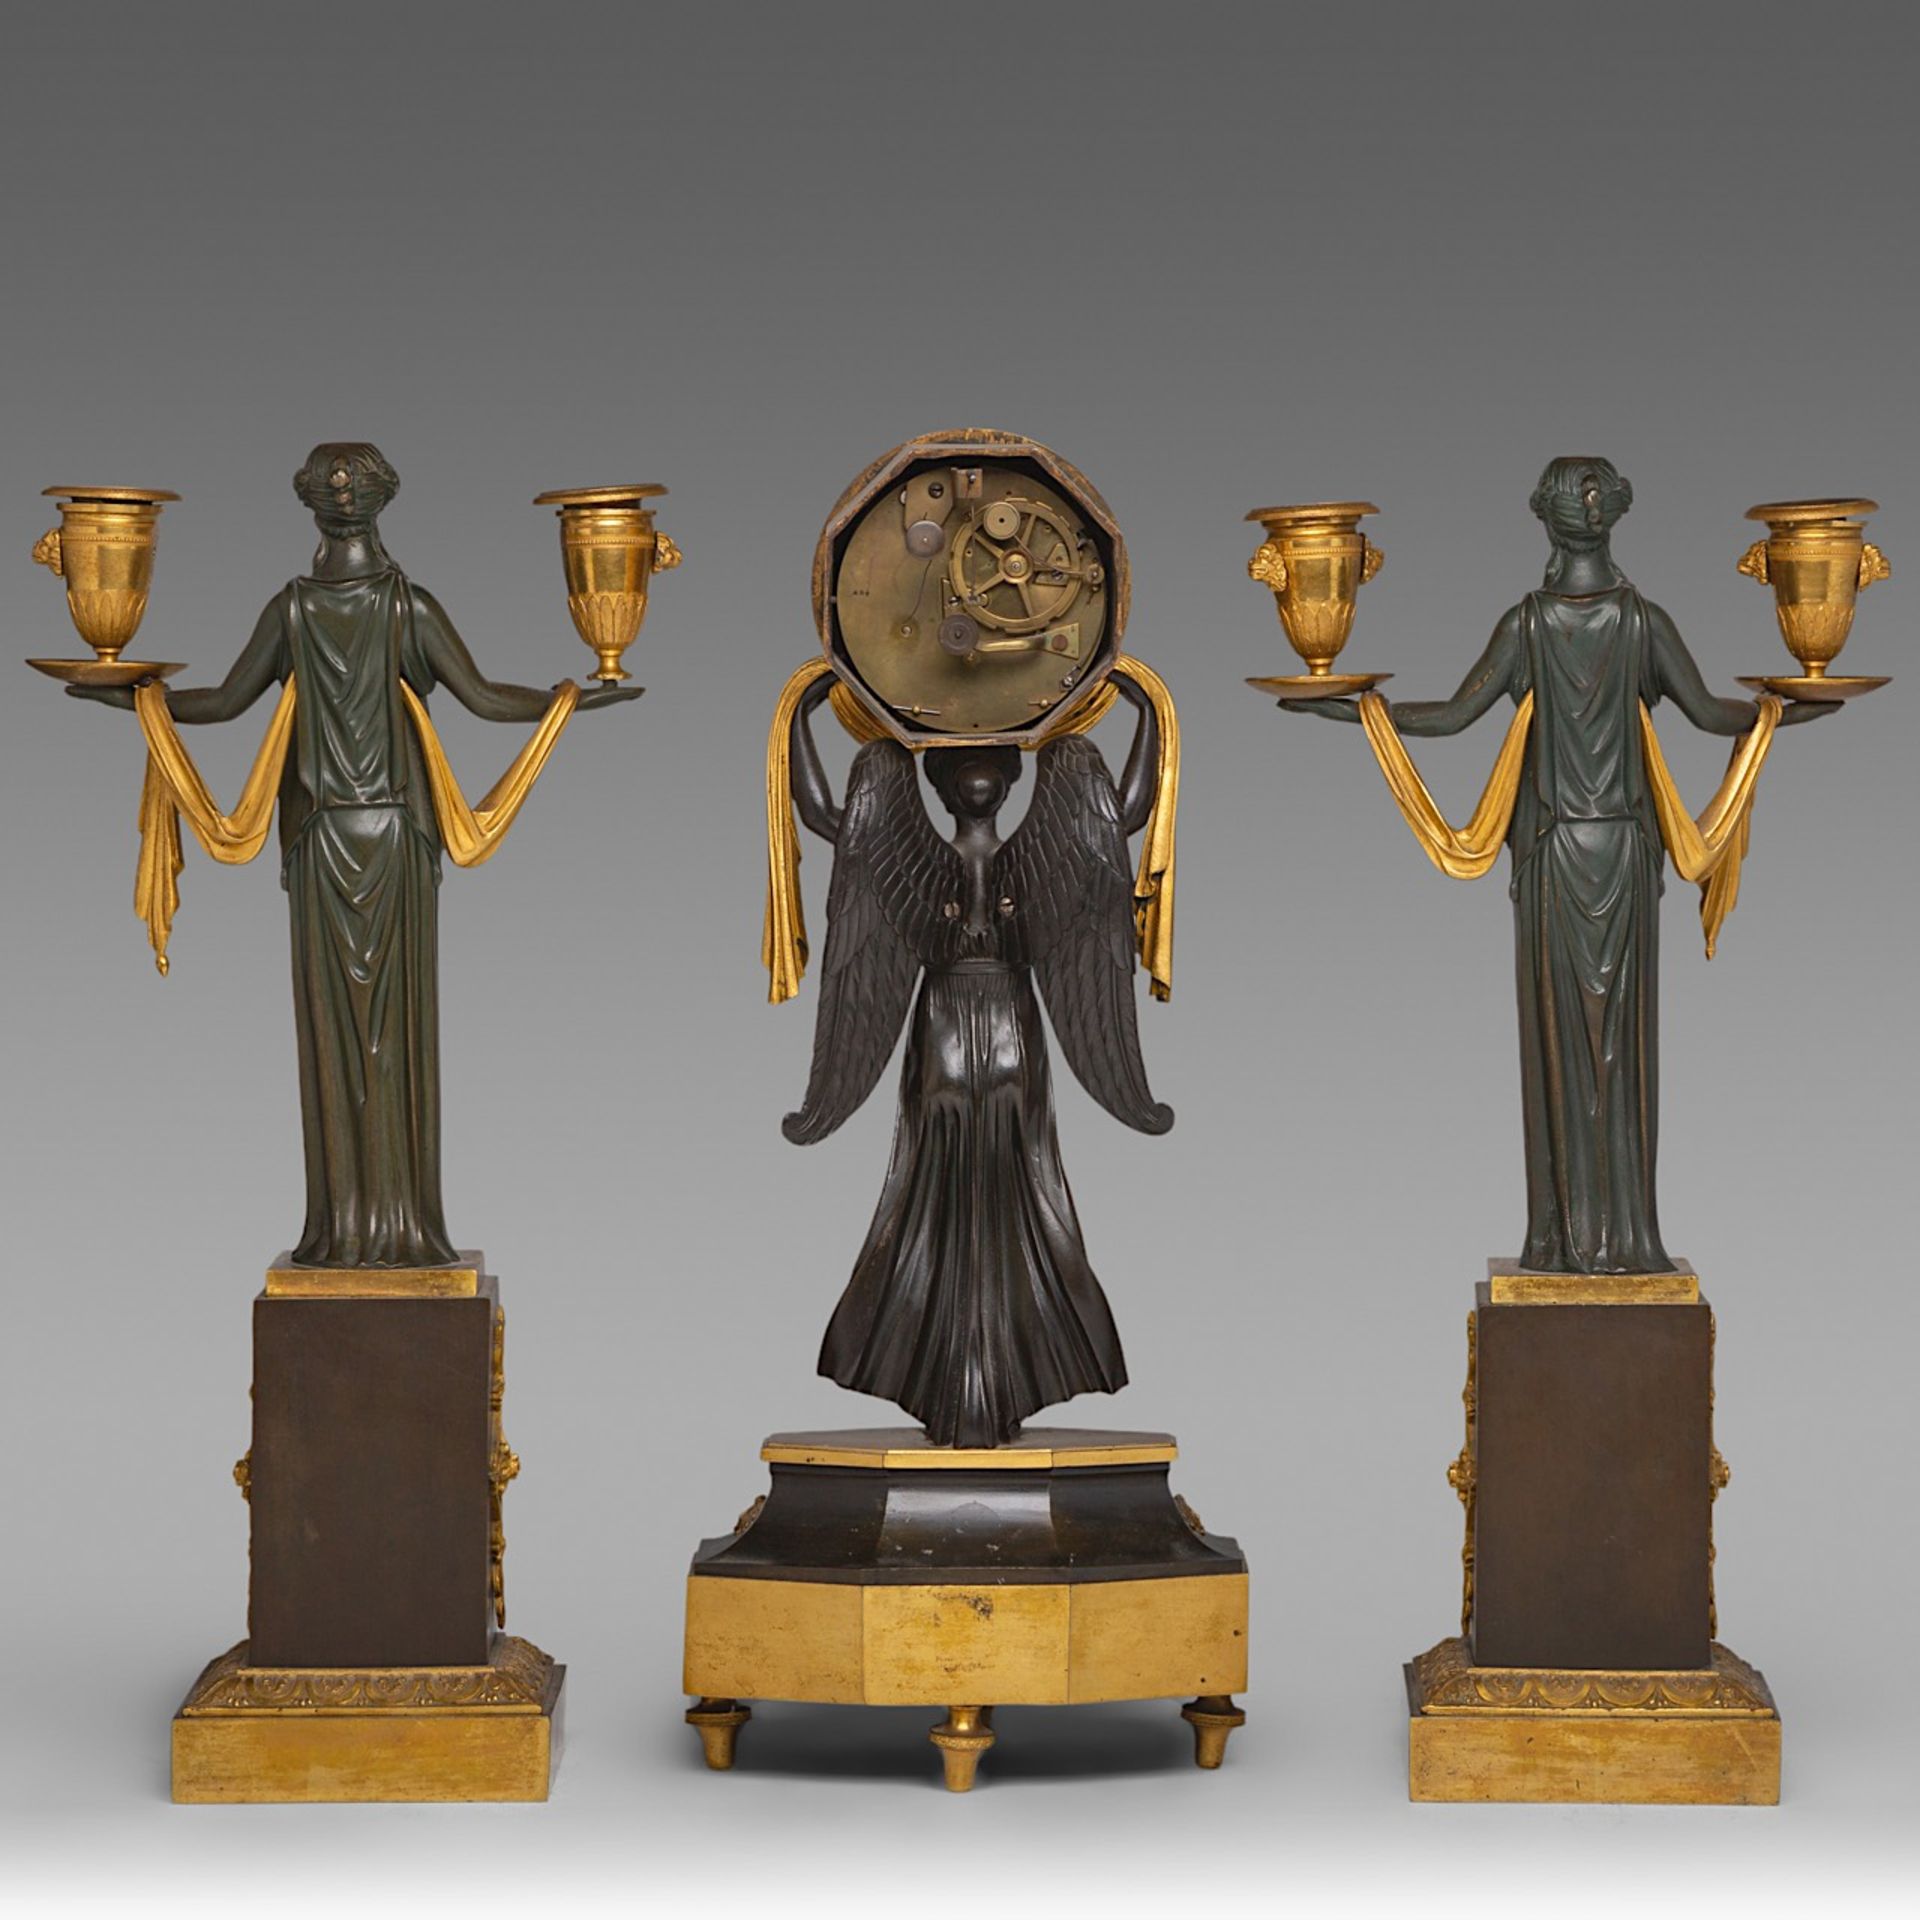 An Empire figural mantle clock, and two matching candelabras, H 43 - 44 cm - Image 3 of 6